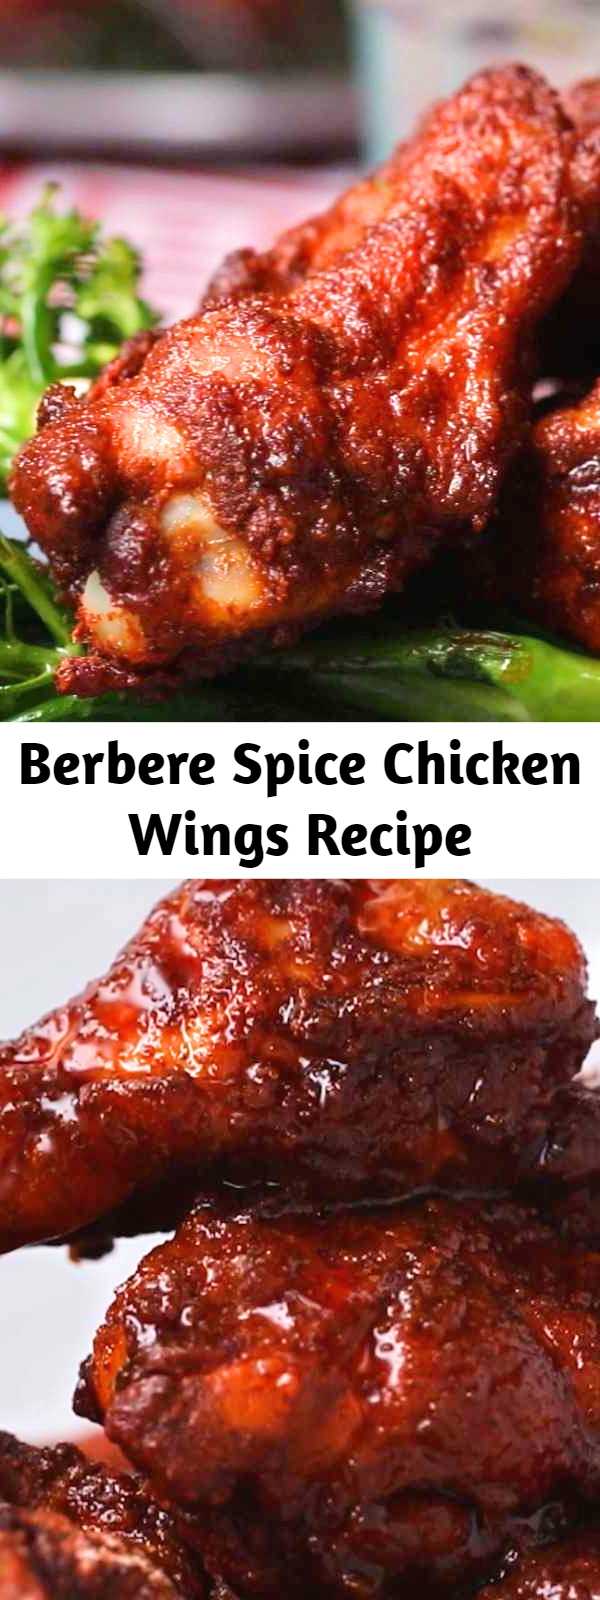 Berbere Spice Chicken Wings Recipe - These berebere-spiced chicken wings are a new flavor you'll won't regret trying 😍!